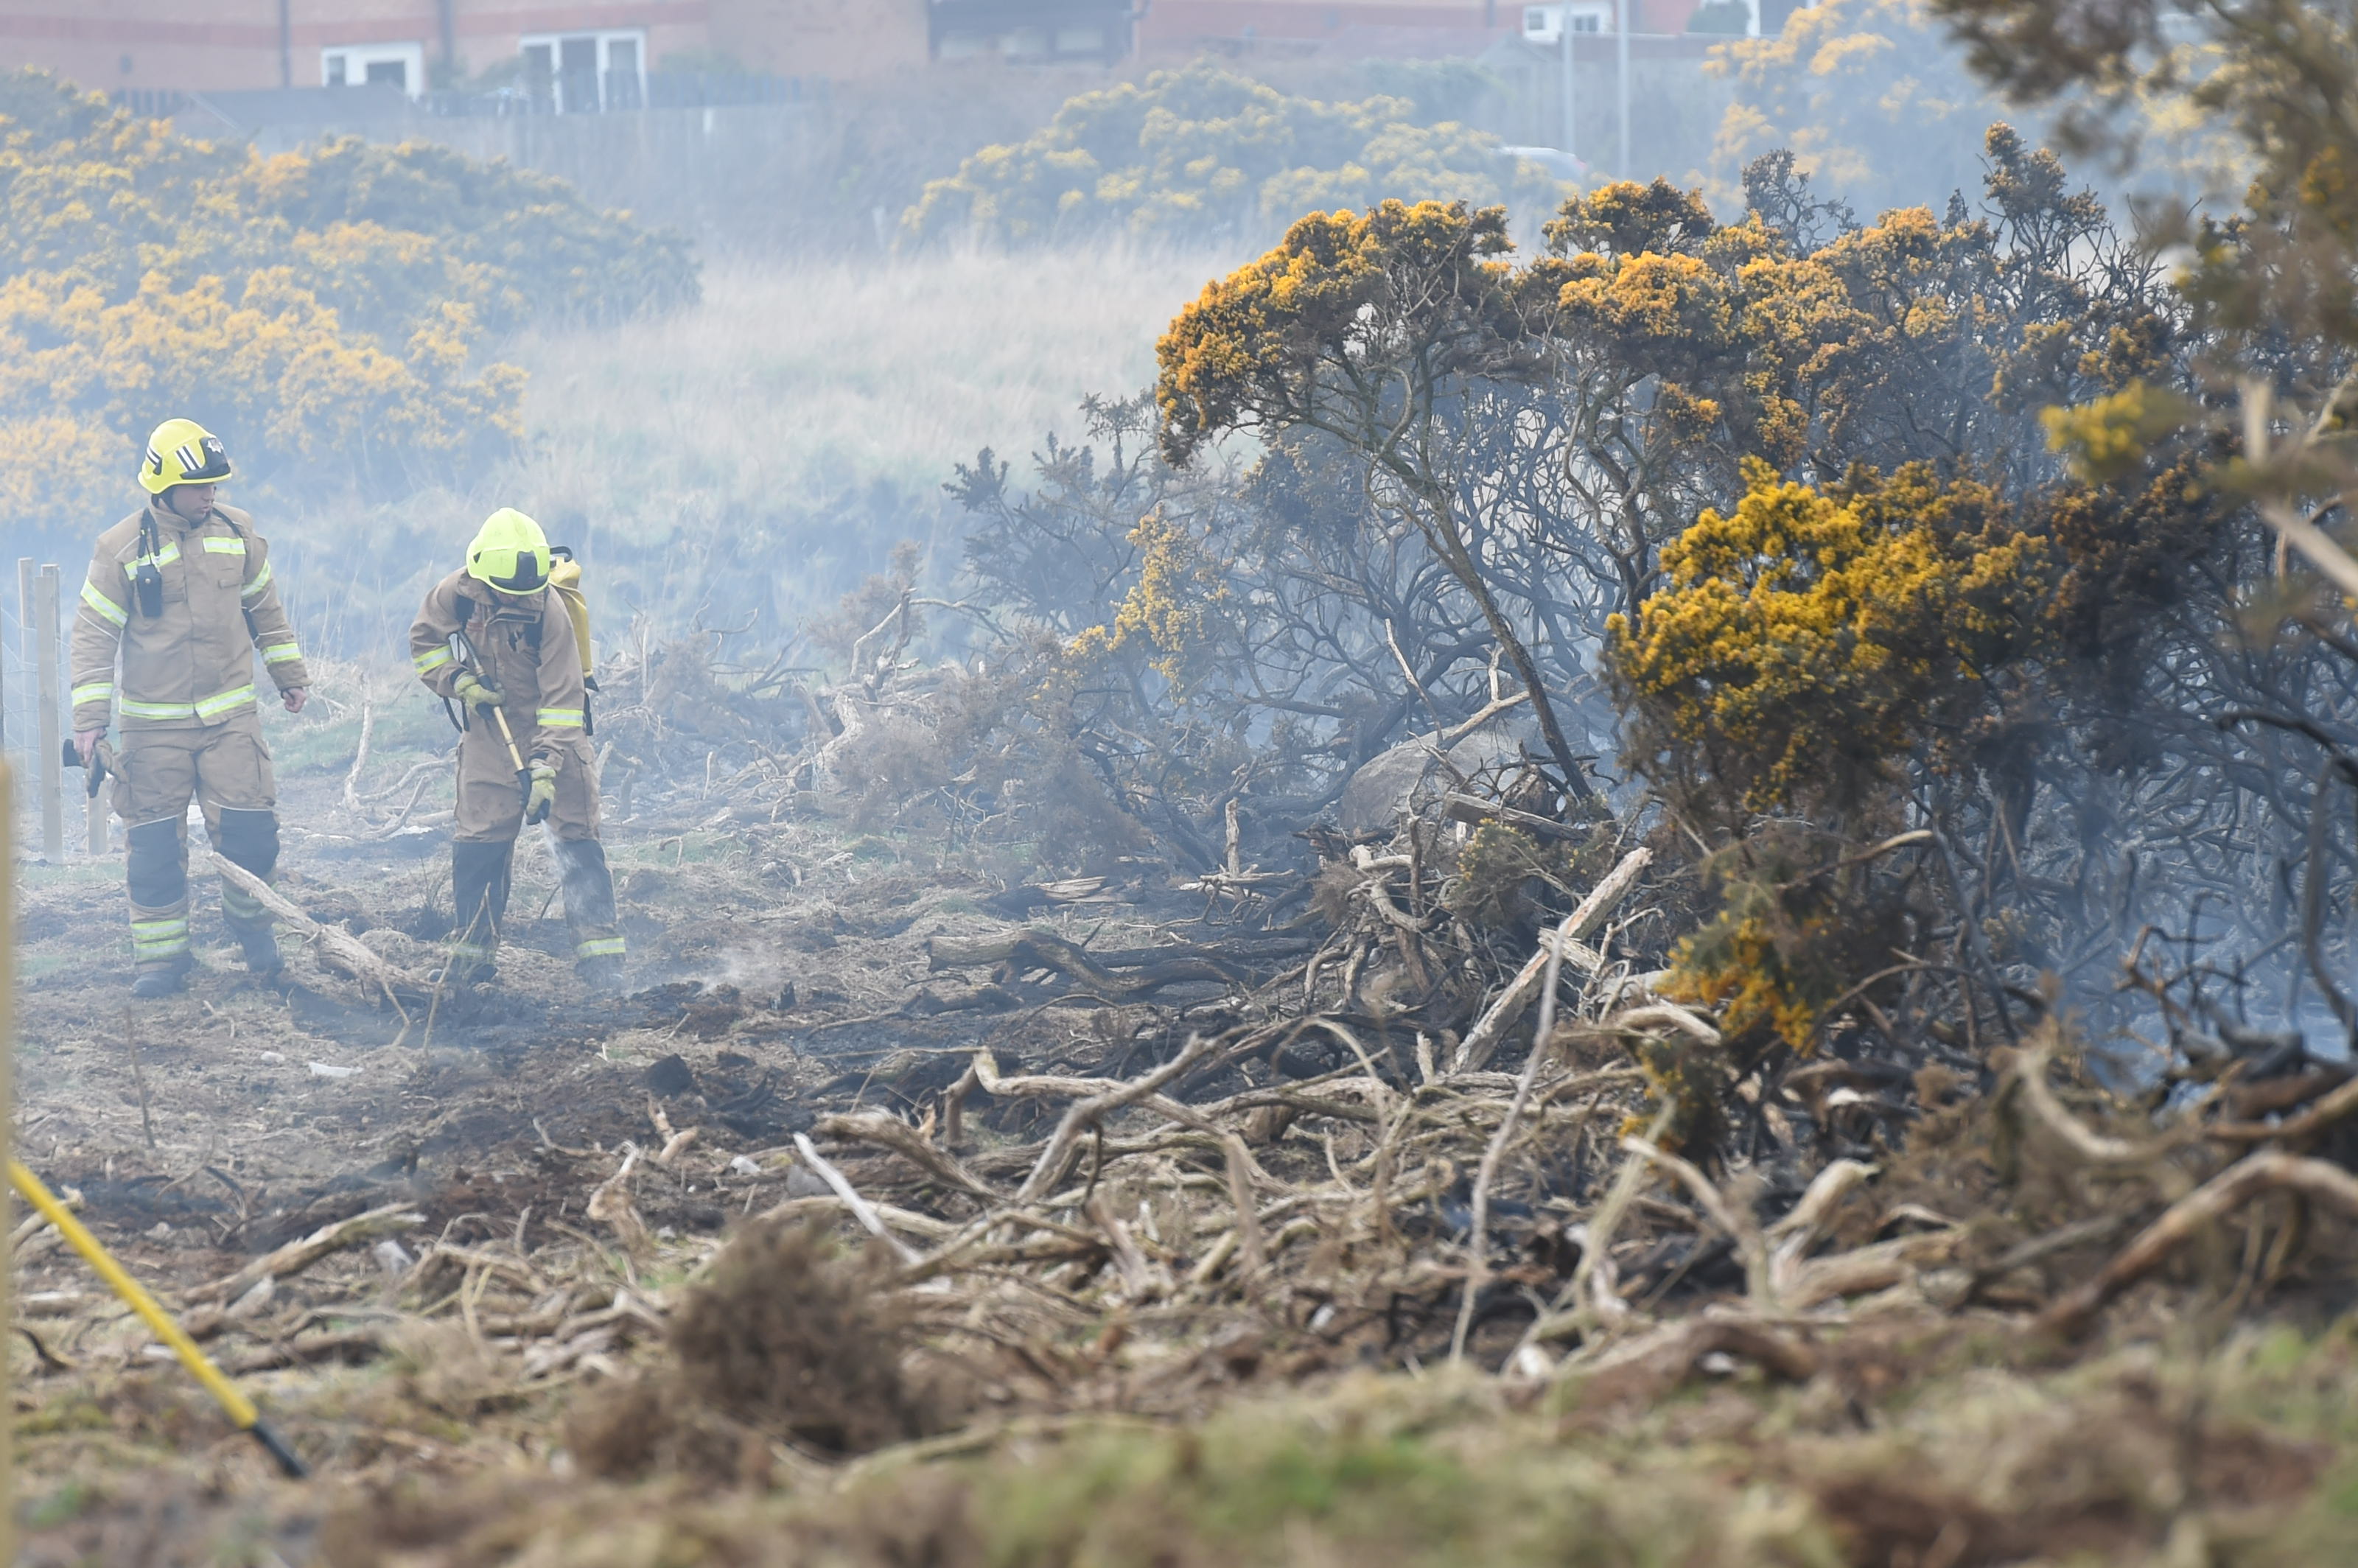 Firefighters at the Scotstown Nature Reserve in Aberdeen